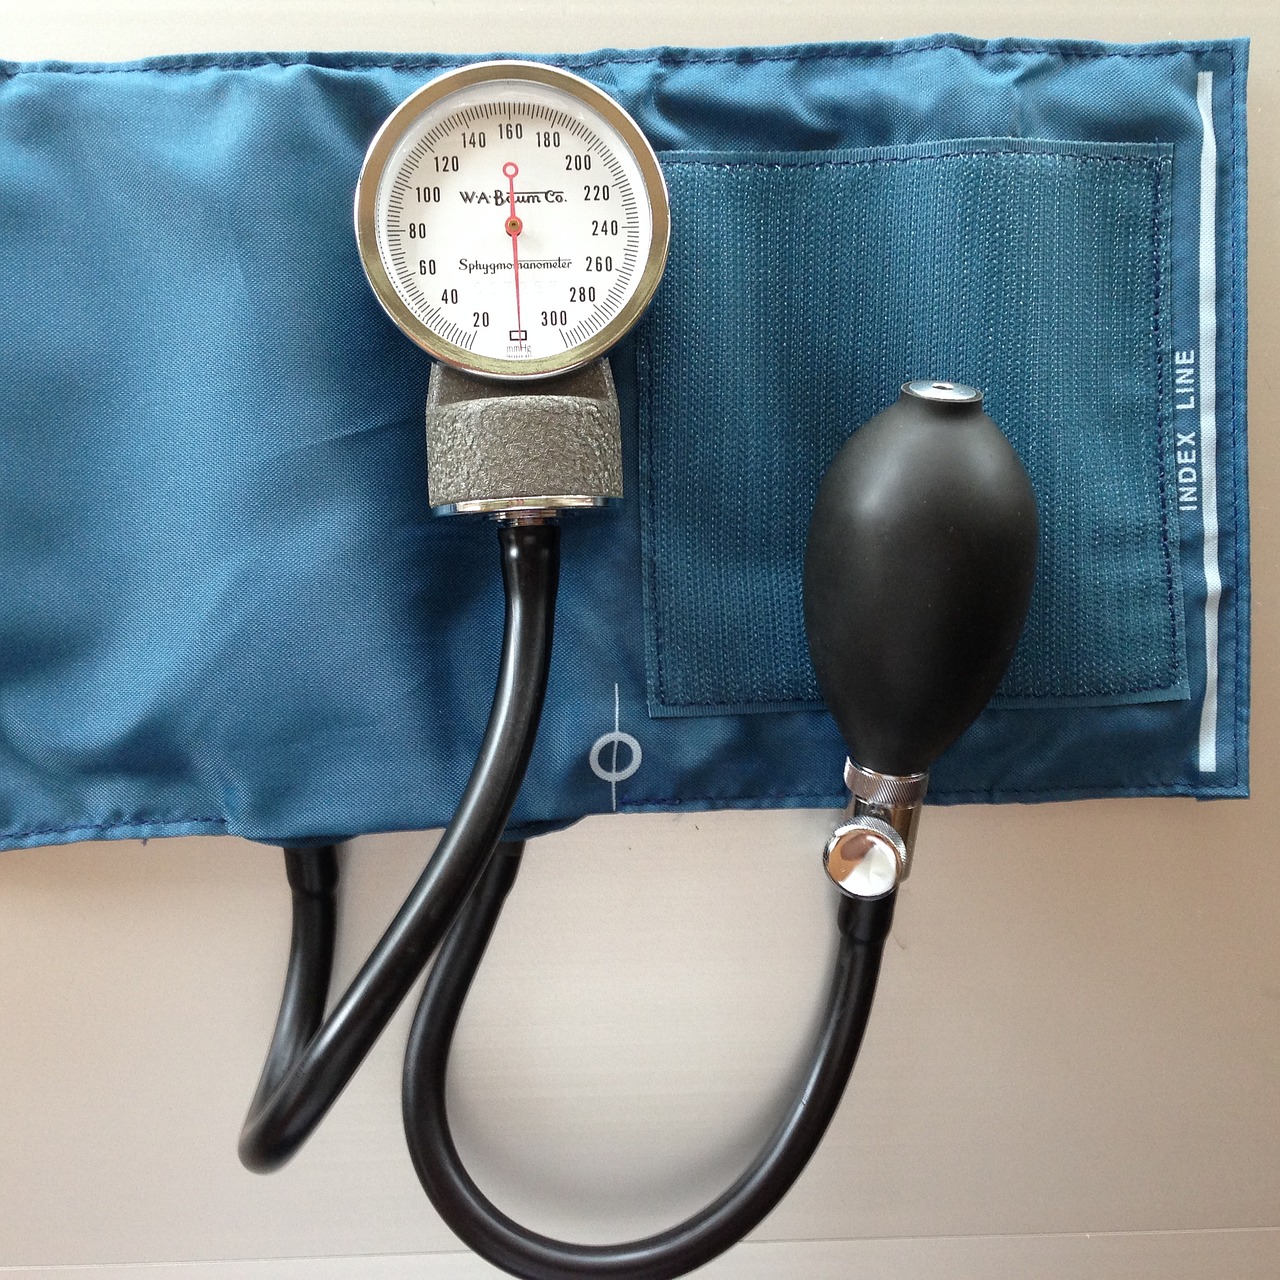 Variable Blood Pressure Readings Between Different Body Parts